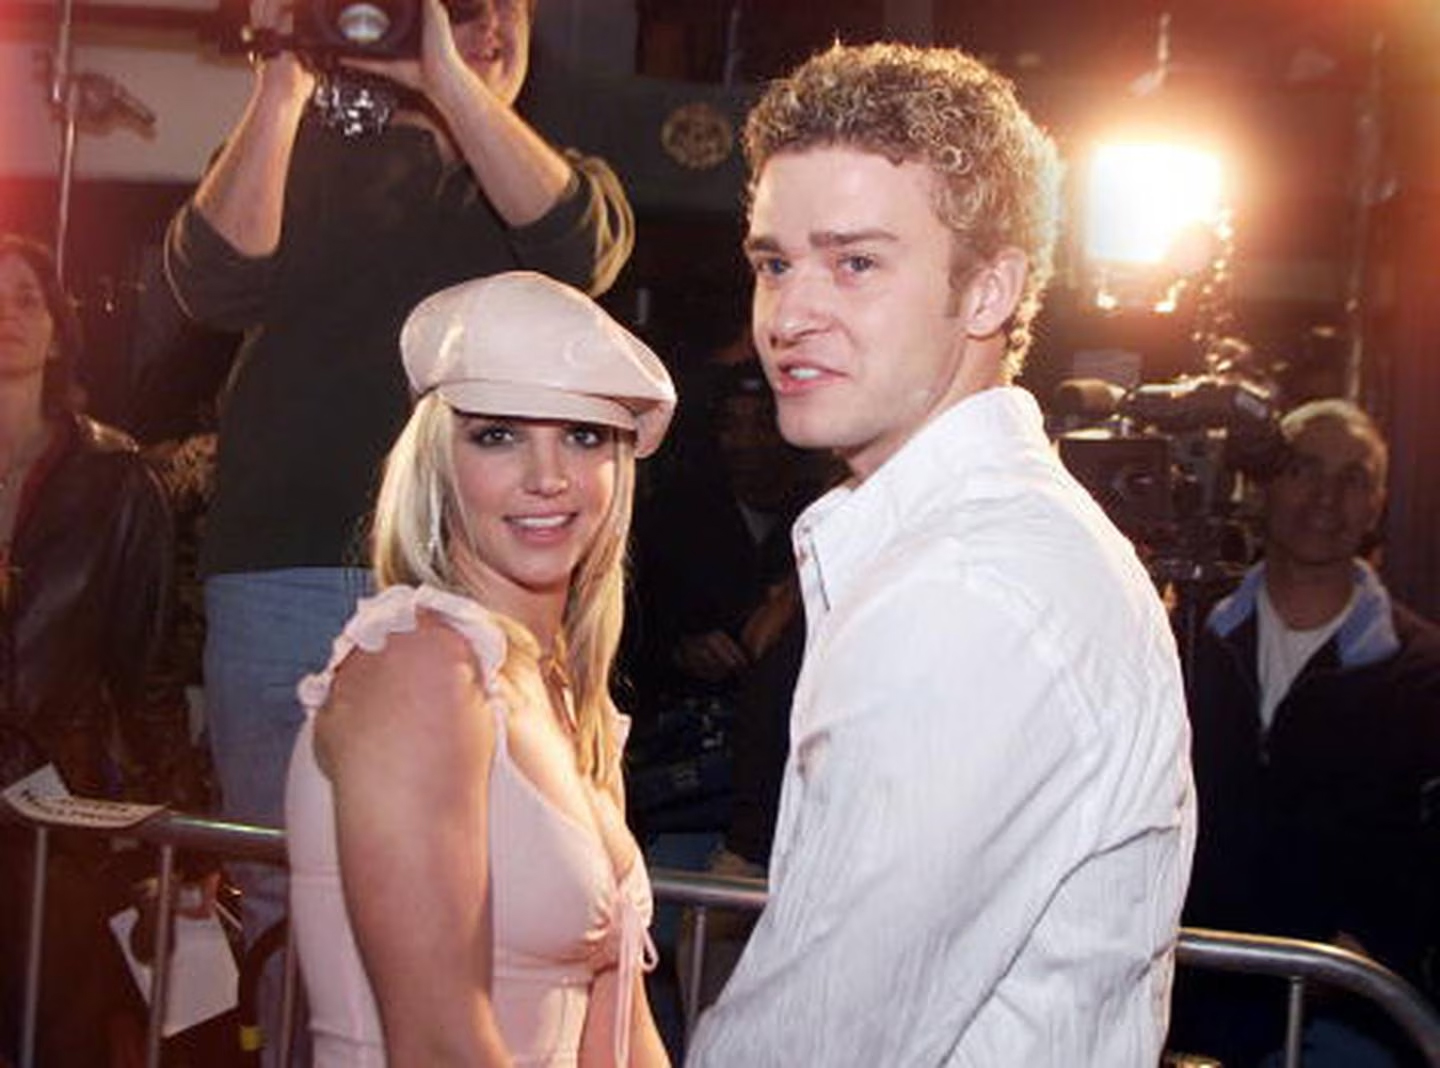 96.5 Rock FM - On this day in 2002, Justin Timberlake